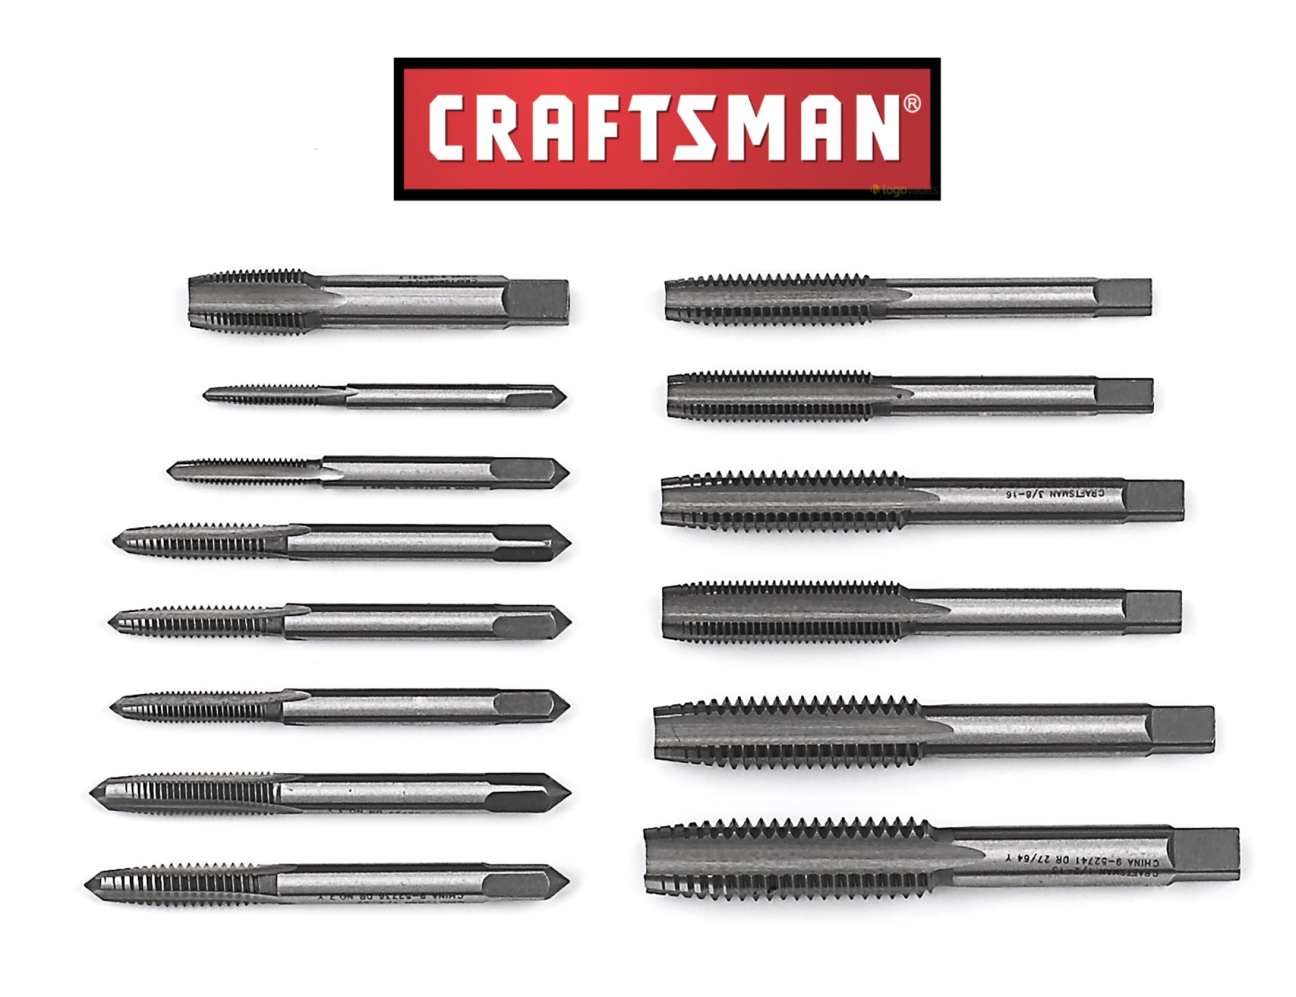 New Craftsman Tap Set Or Choose Any Size, Sae Or Metric, Fast Shipping